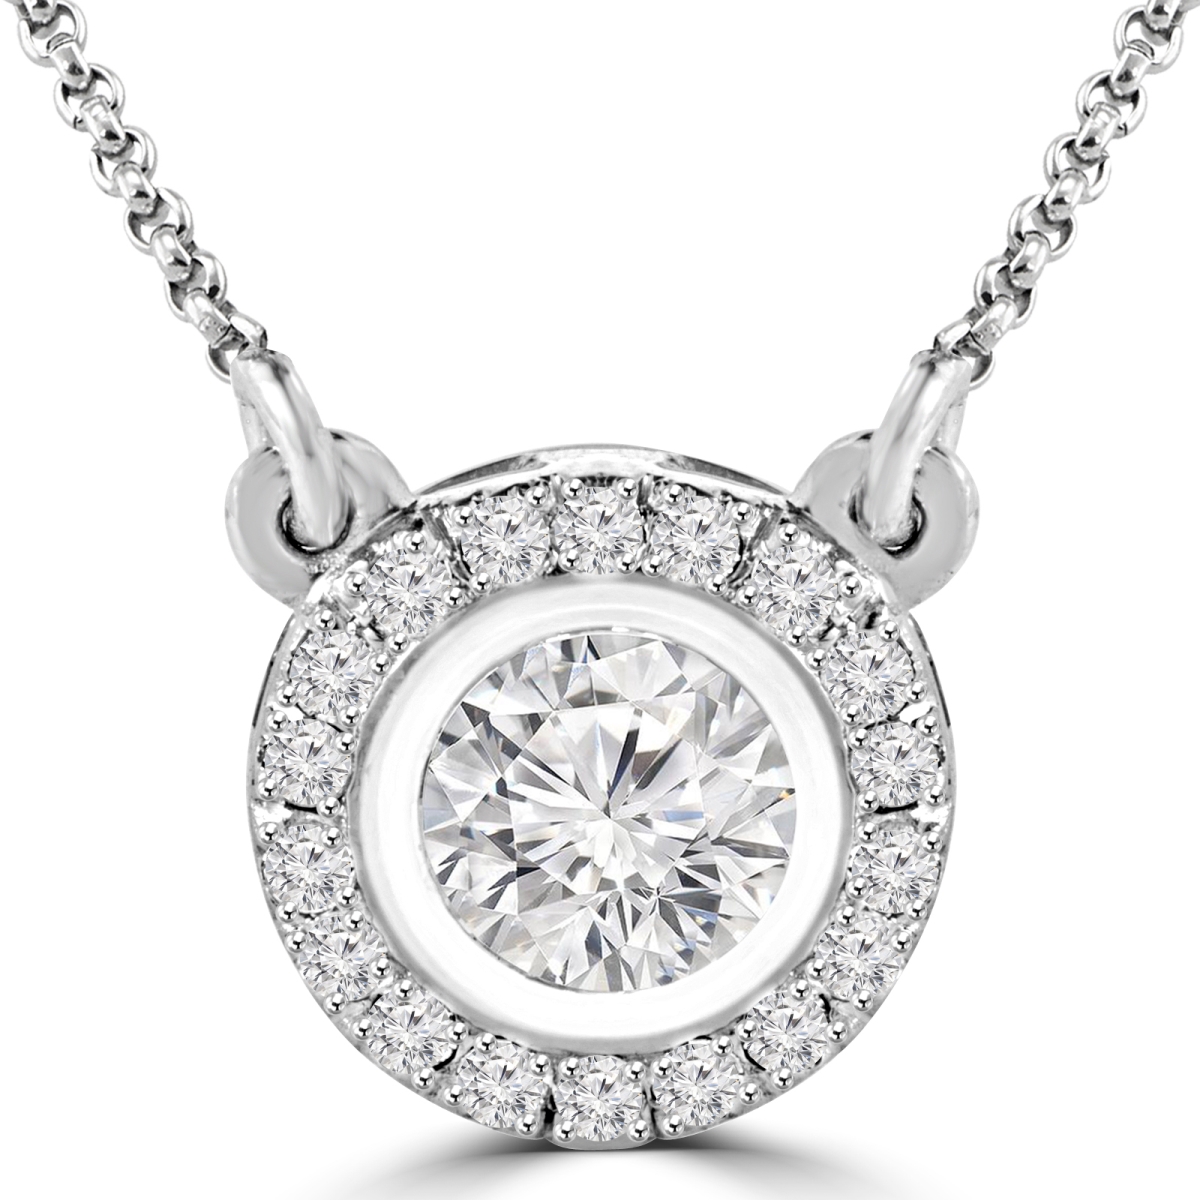 Majesty Diamonds MD170148 0.5 CTW Round Diamond Halo Solitaire with Accents Pendant Necklace in 14K